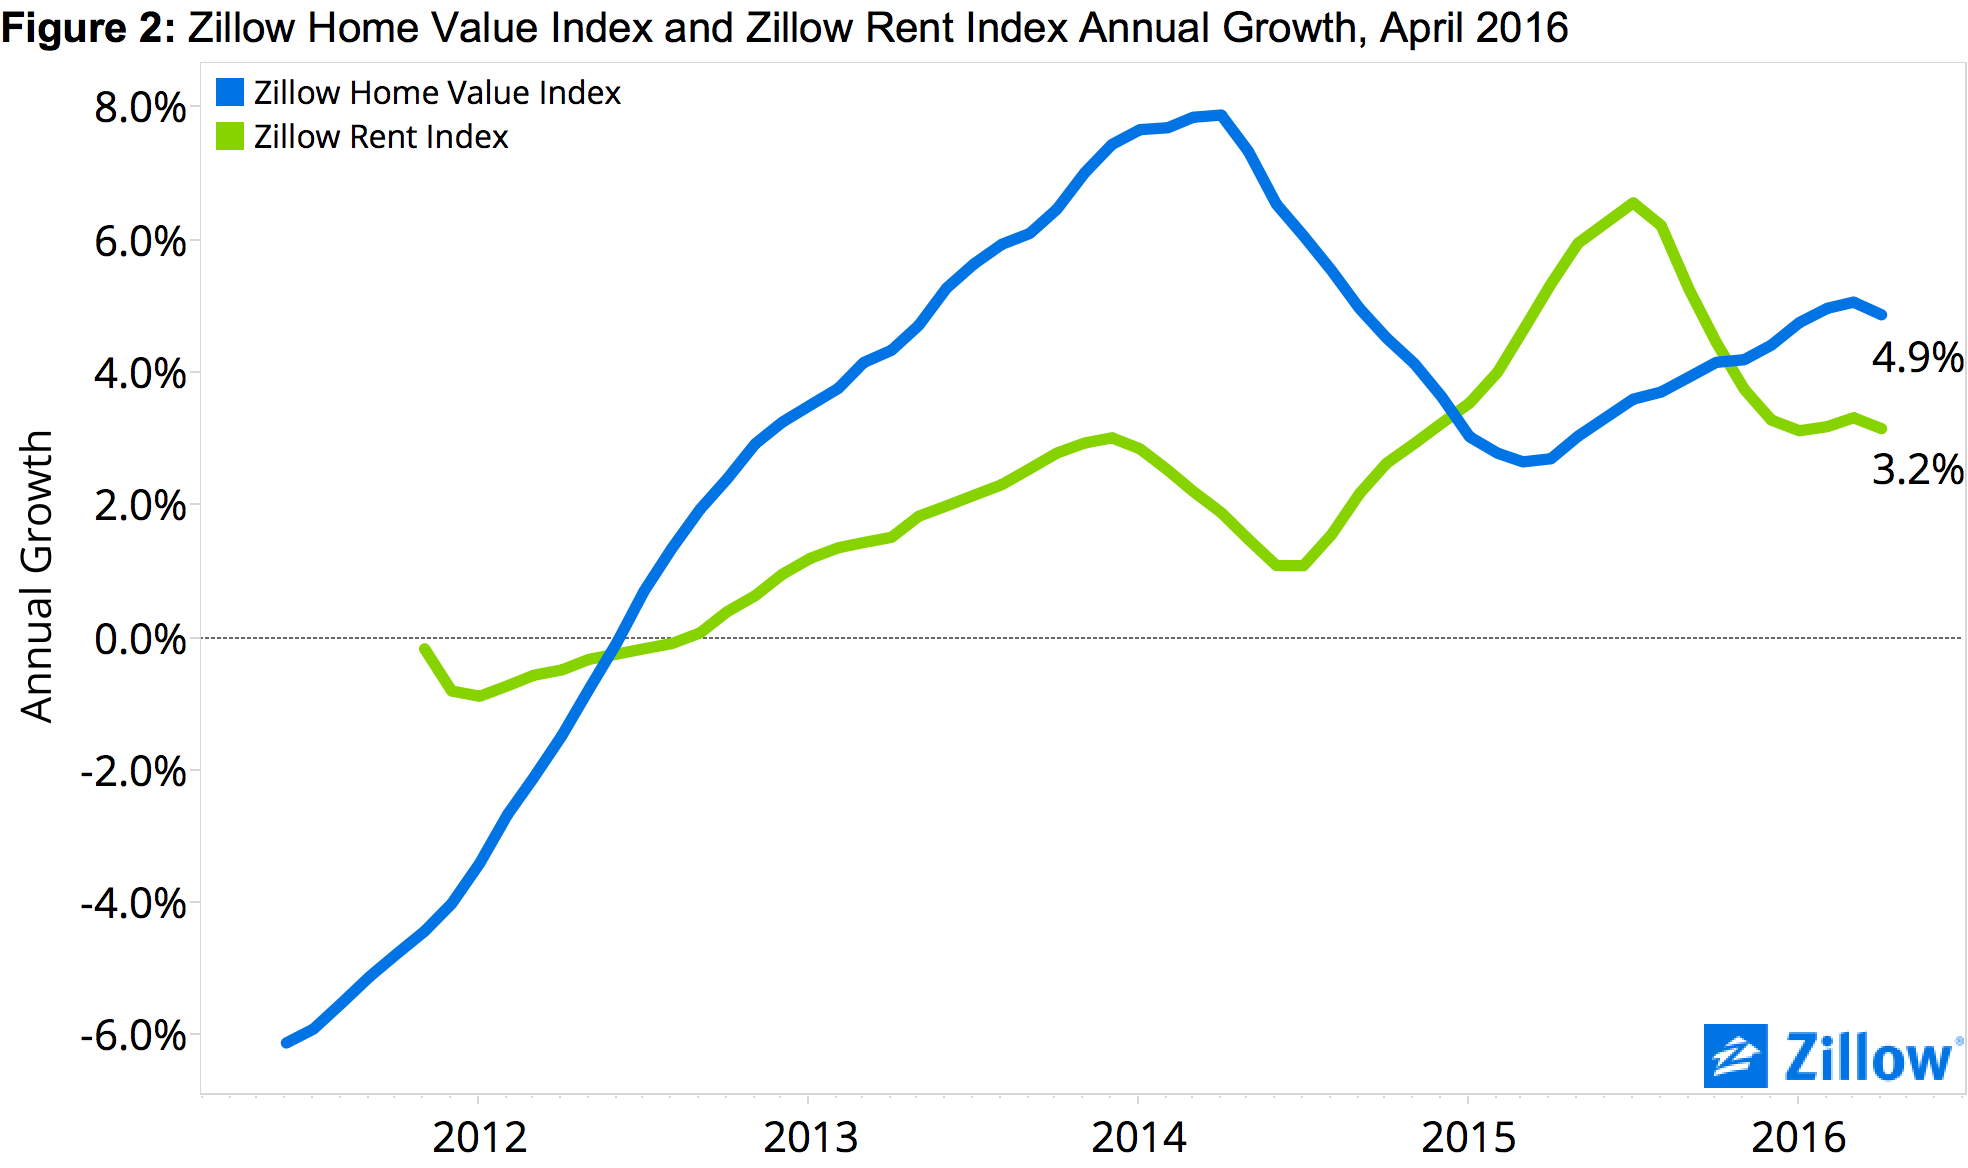 Rent prices. Zillow годовой оборот. Value growth. Индекс хоум. Money, Valuation and growth.